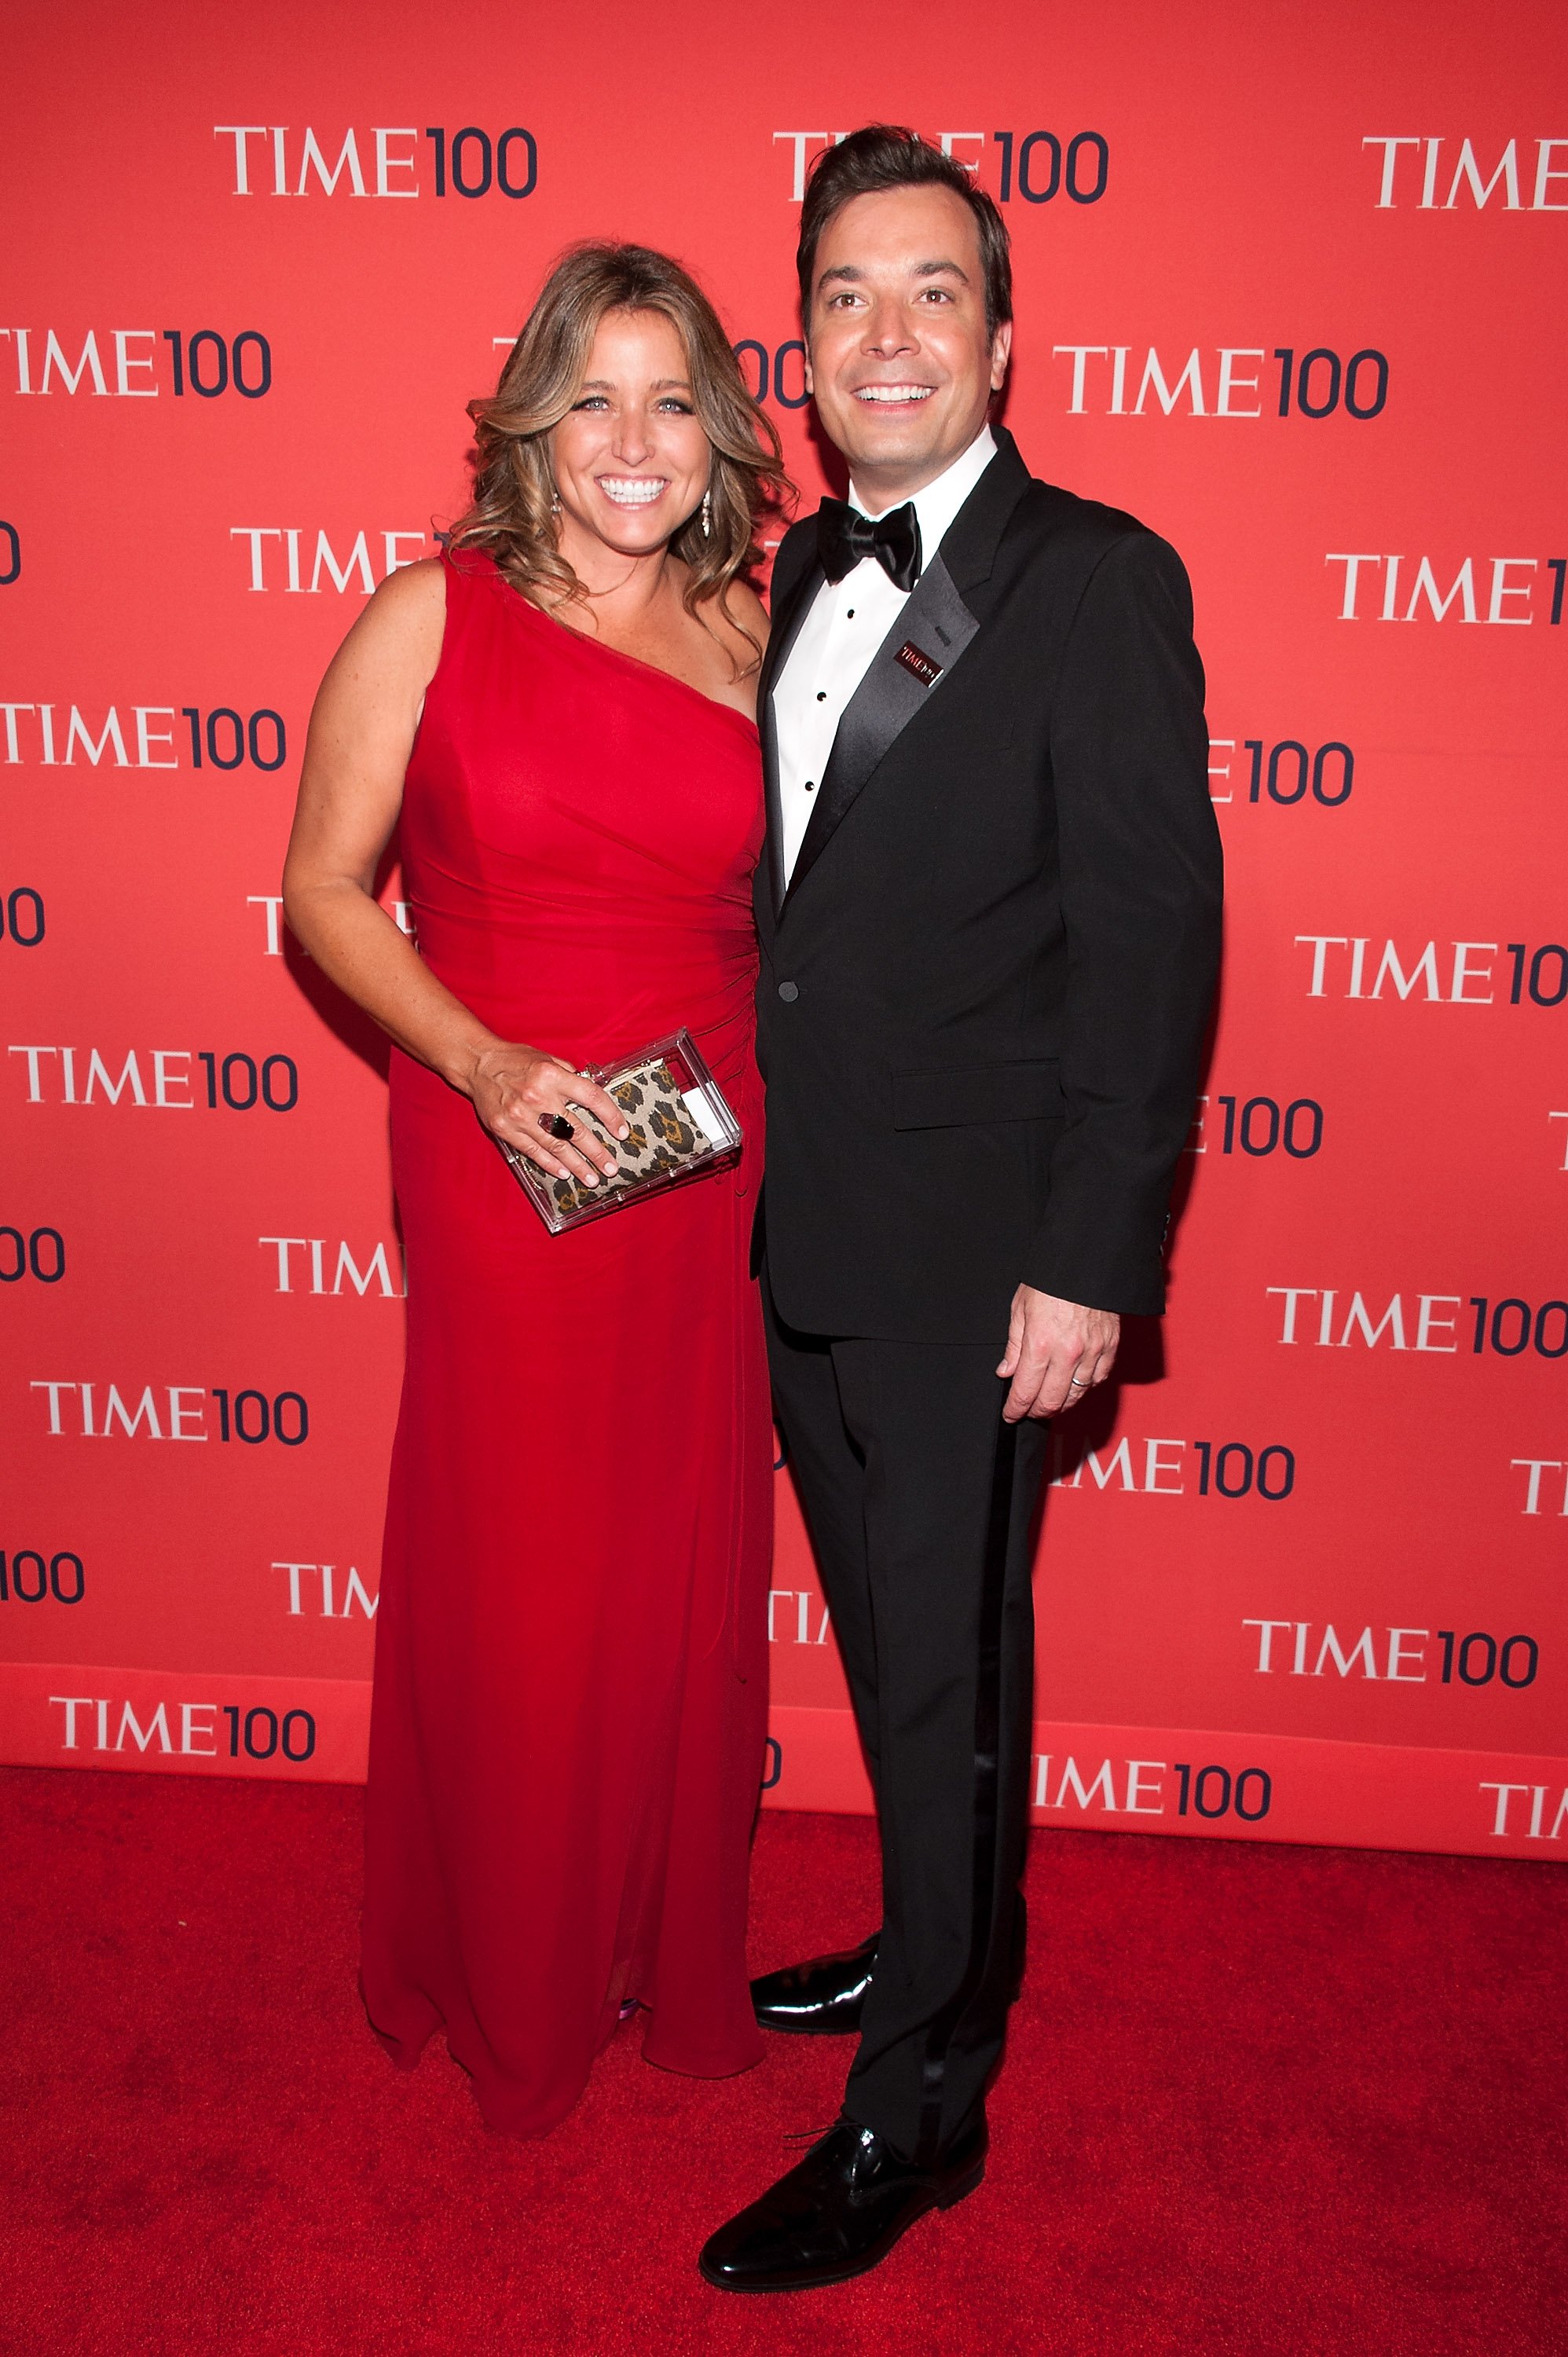 Jimmy Fallon and wife Nancy Juvonen attend the 2013 Time 100 Gala at Frederick P. Rose Hall, Jazz at Lincoln Center on April 23, 2013 in New York City | Photo: GettyImages